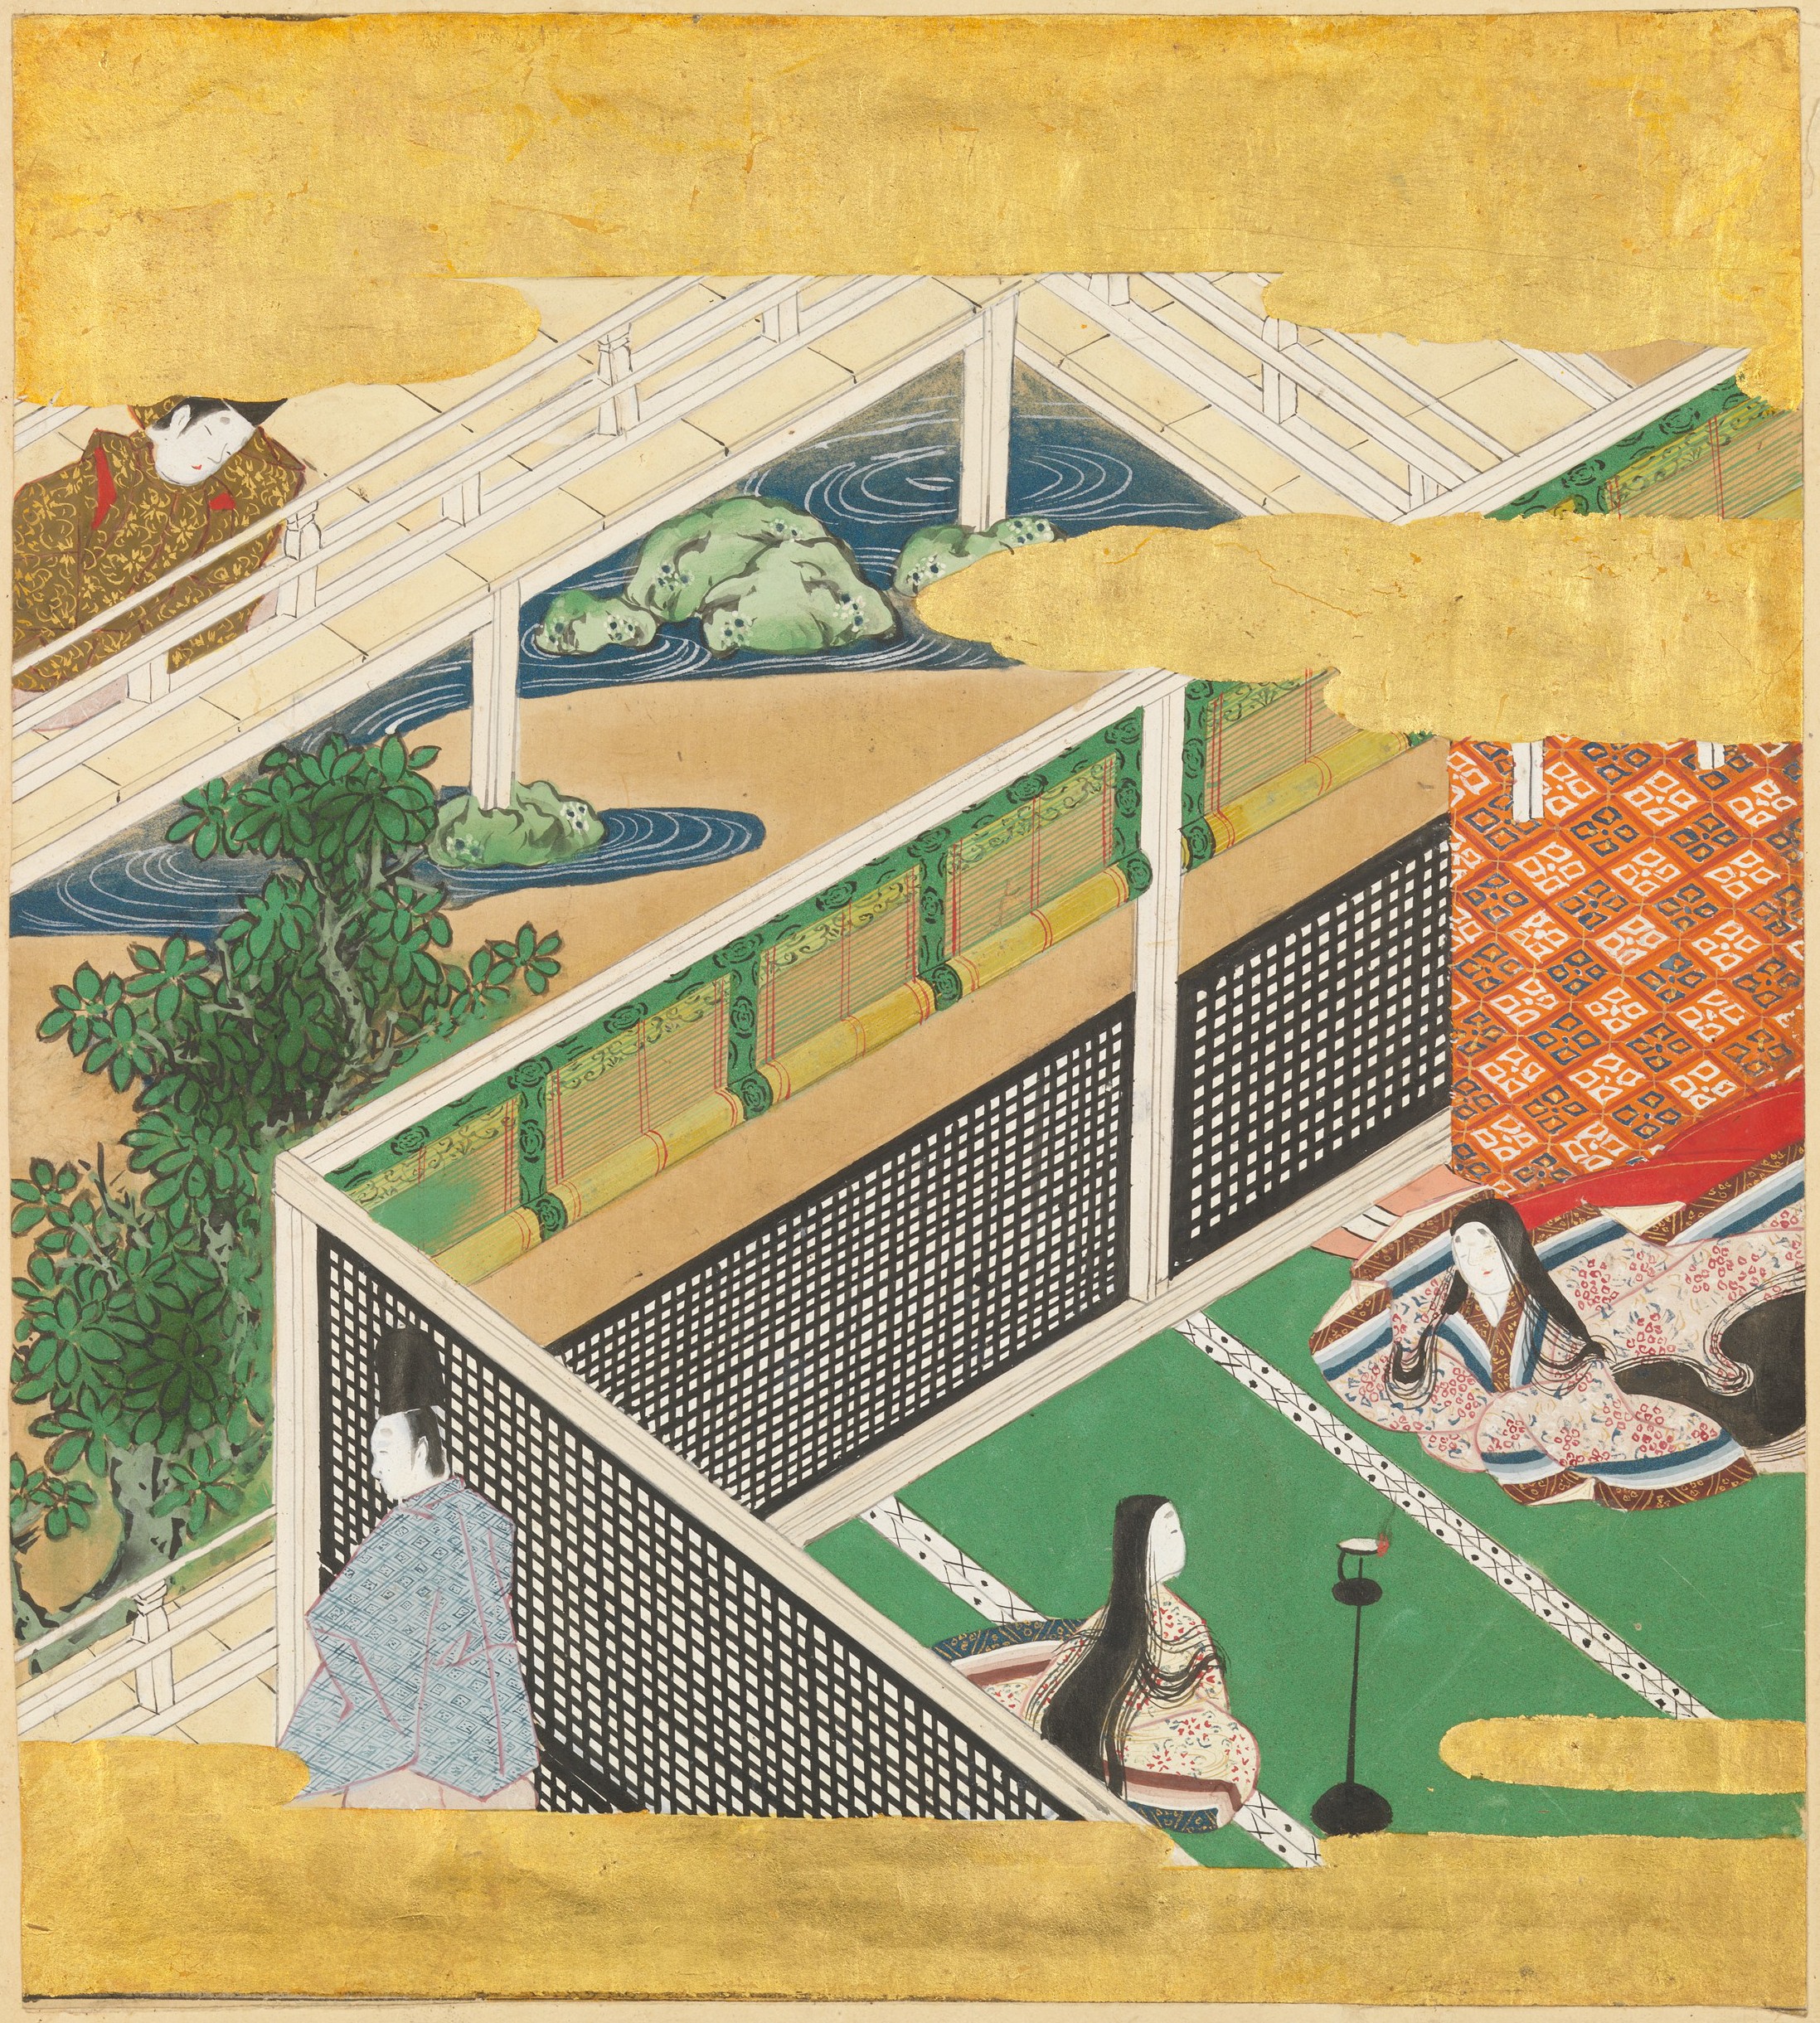 Formerly Attributed To Tosa Mitsusada The Tale Of Genji Genji